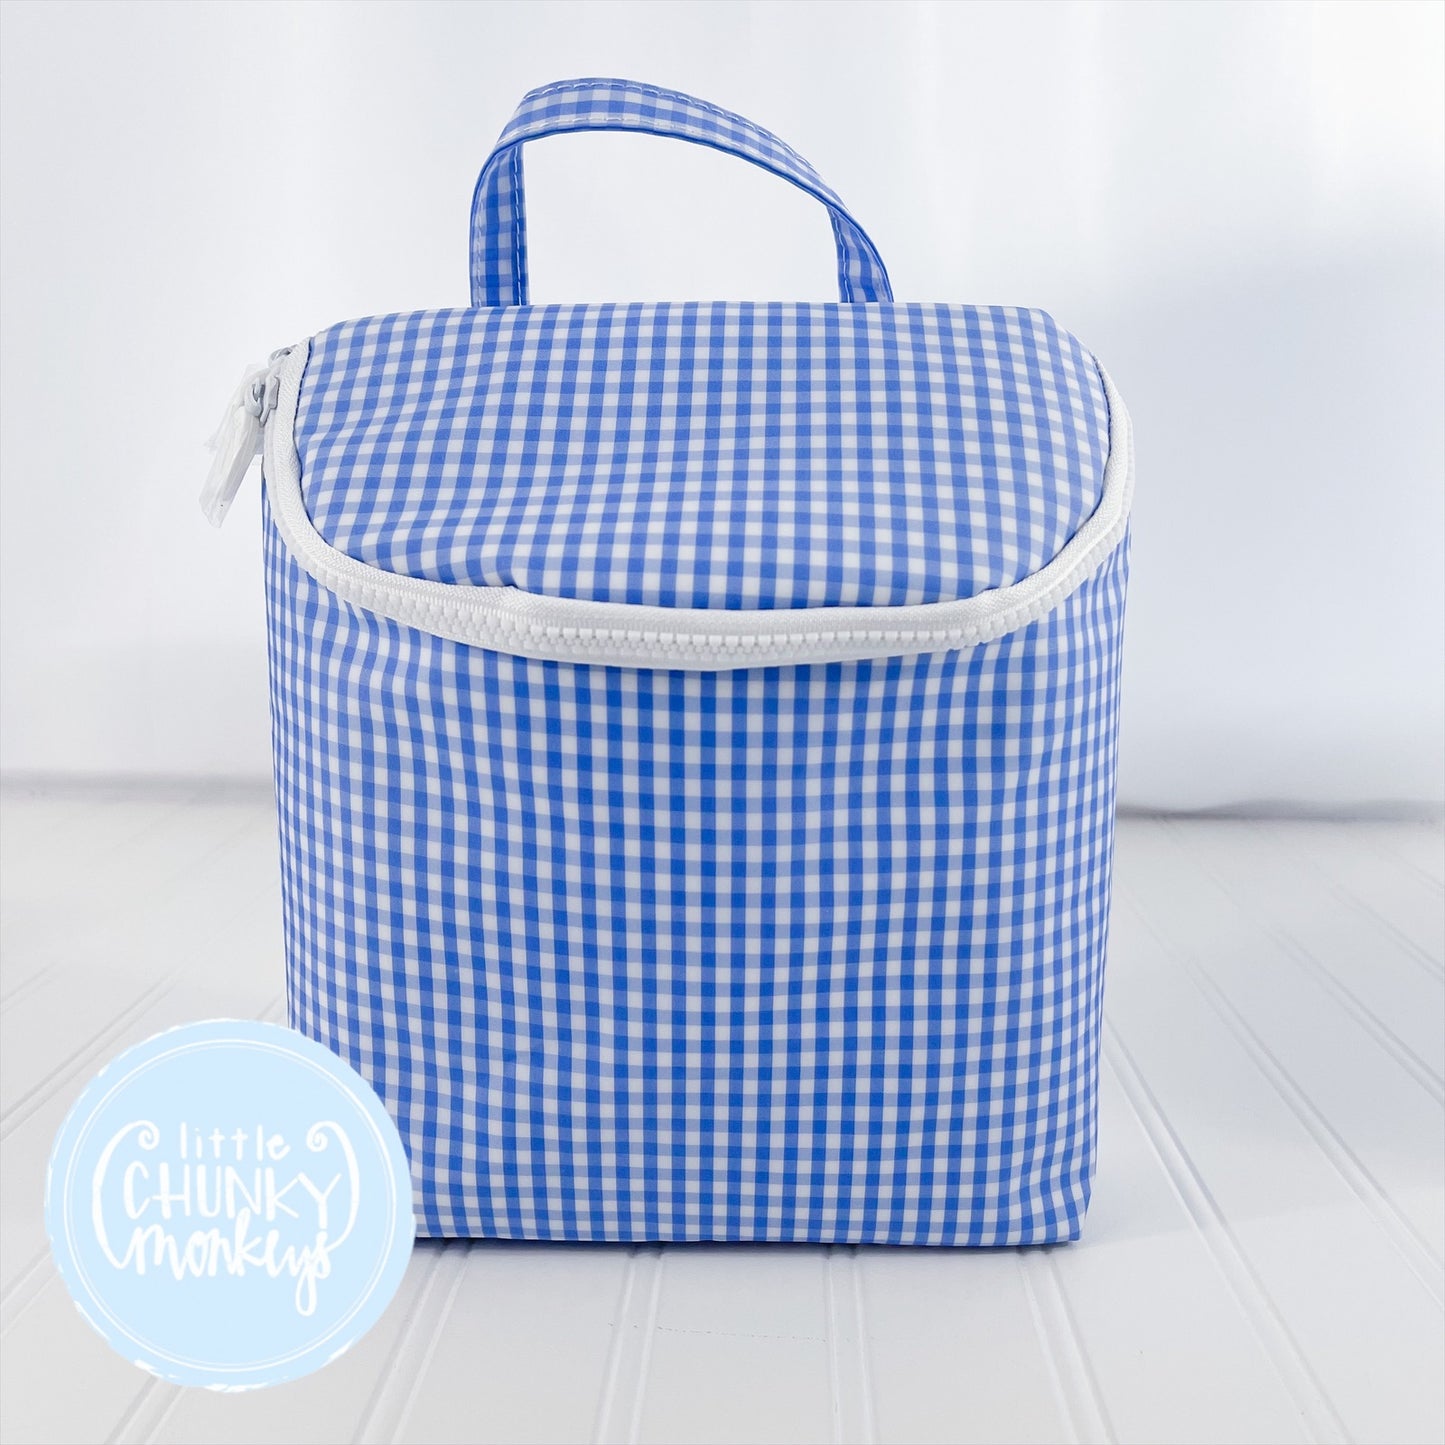 Take Away Lunch Tote - Blue Gingham